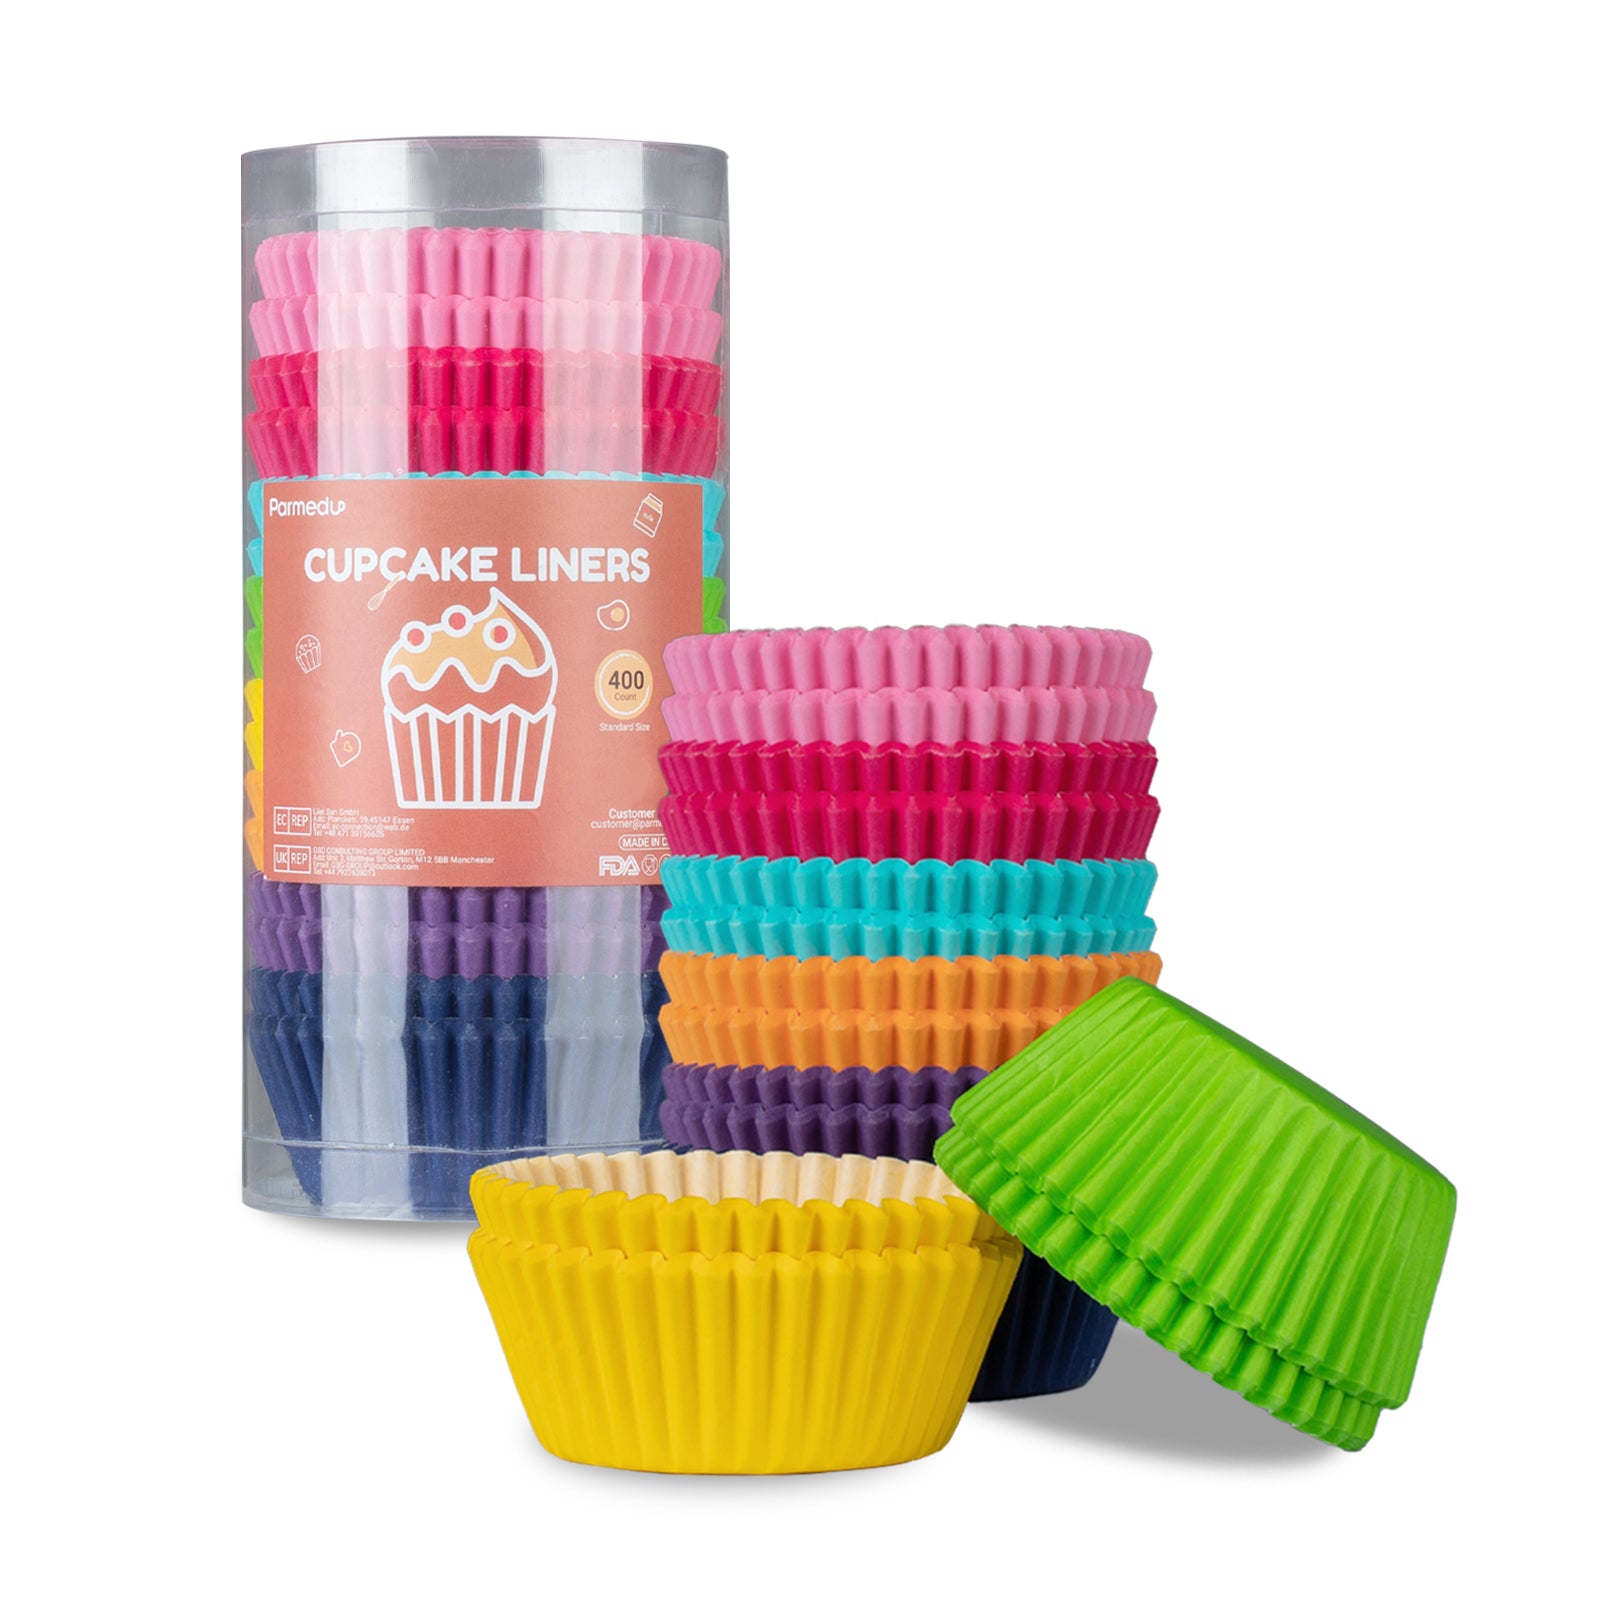 Mini Paper Cupcake Liners - MADE IN USA -Fluted Cupcake Holder Cups for  Baking Muffins, Food-Grade, Odorless, Non-Stick, Quick-Release - Fits Mini